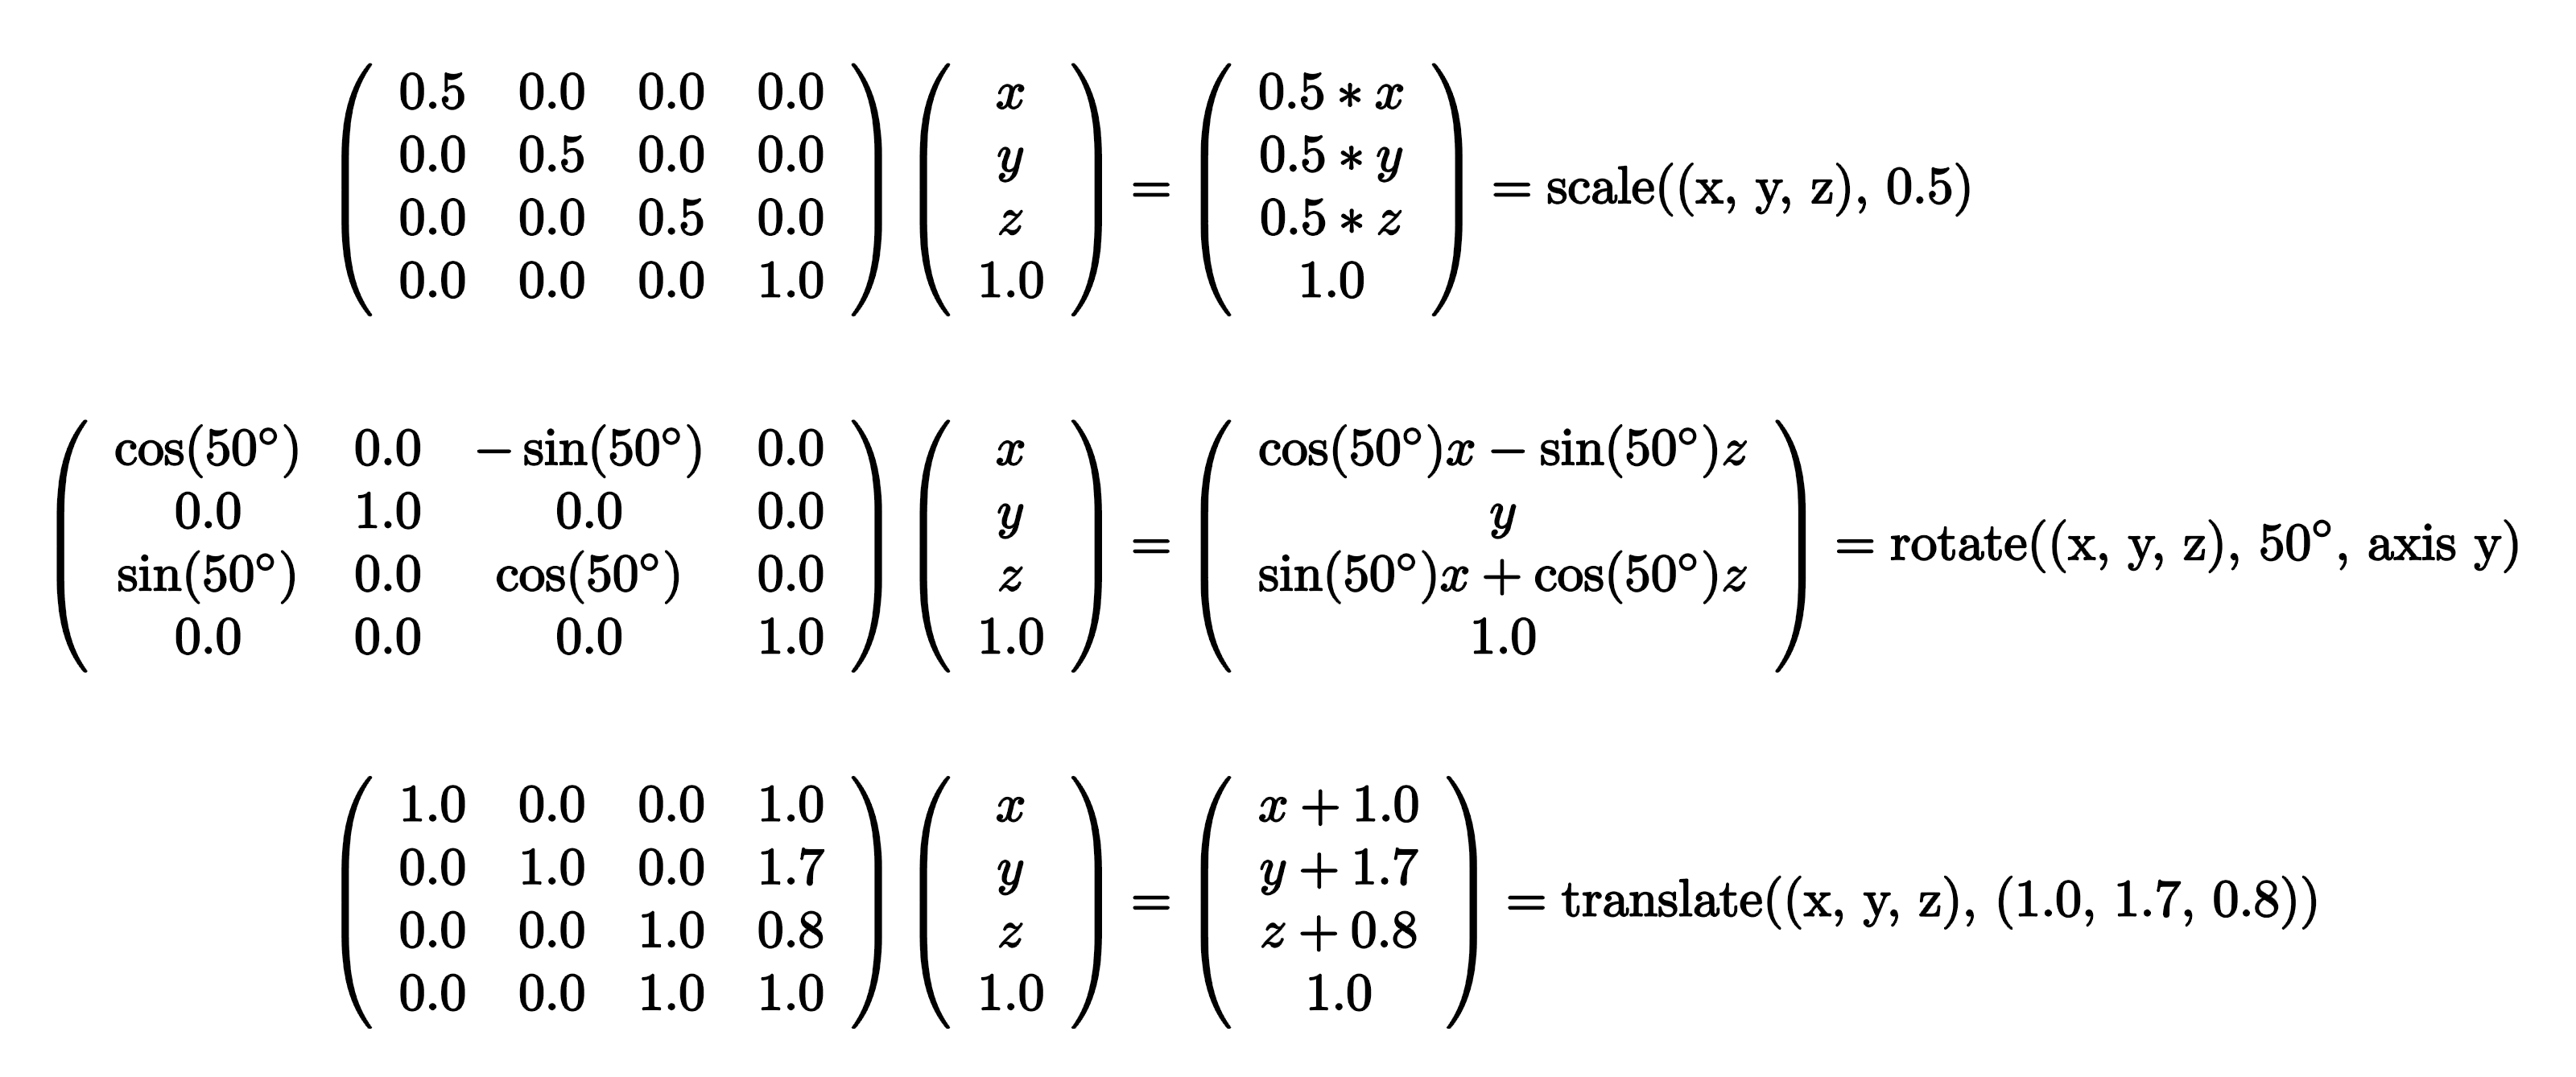 Examples of transformation matrices